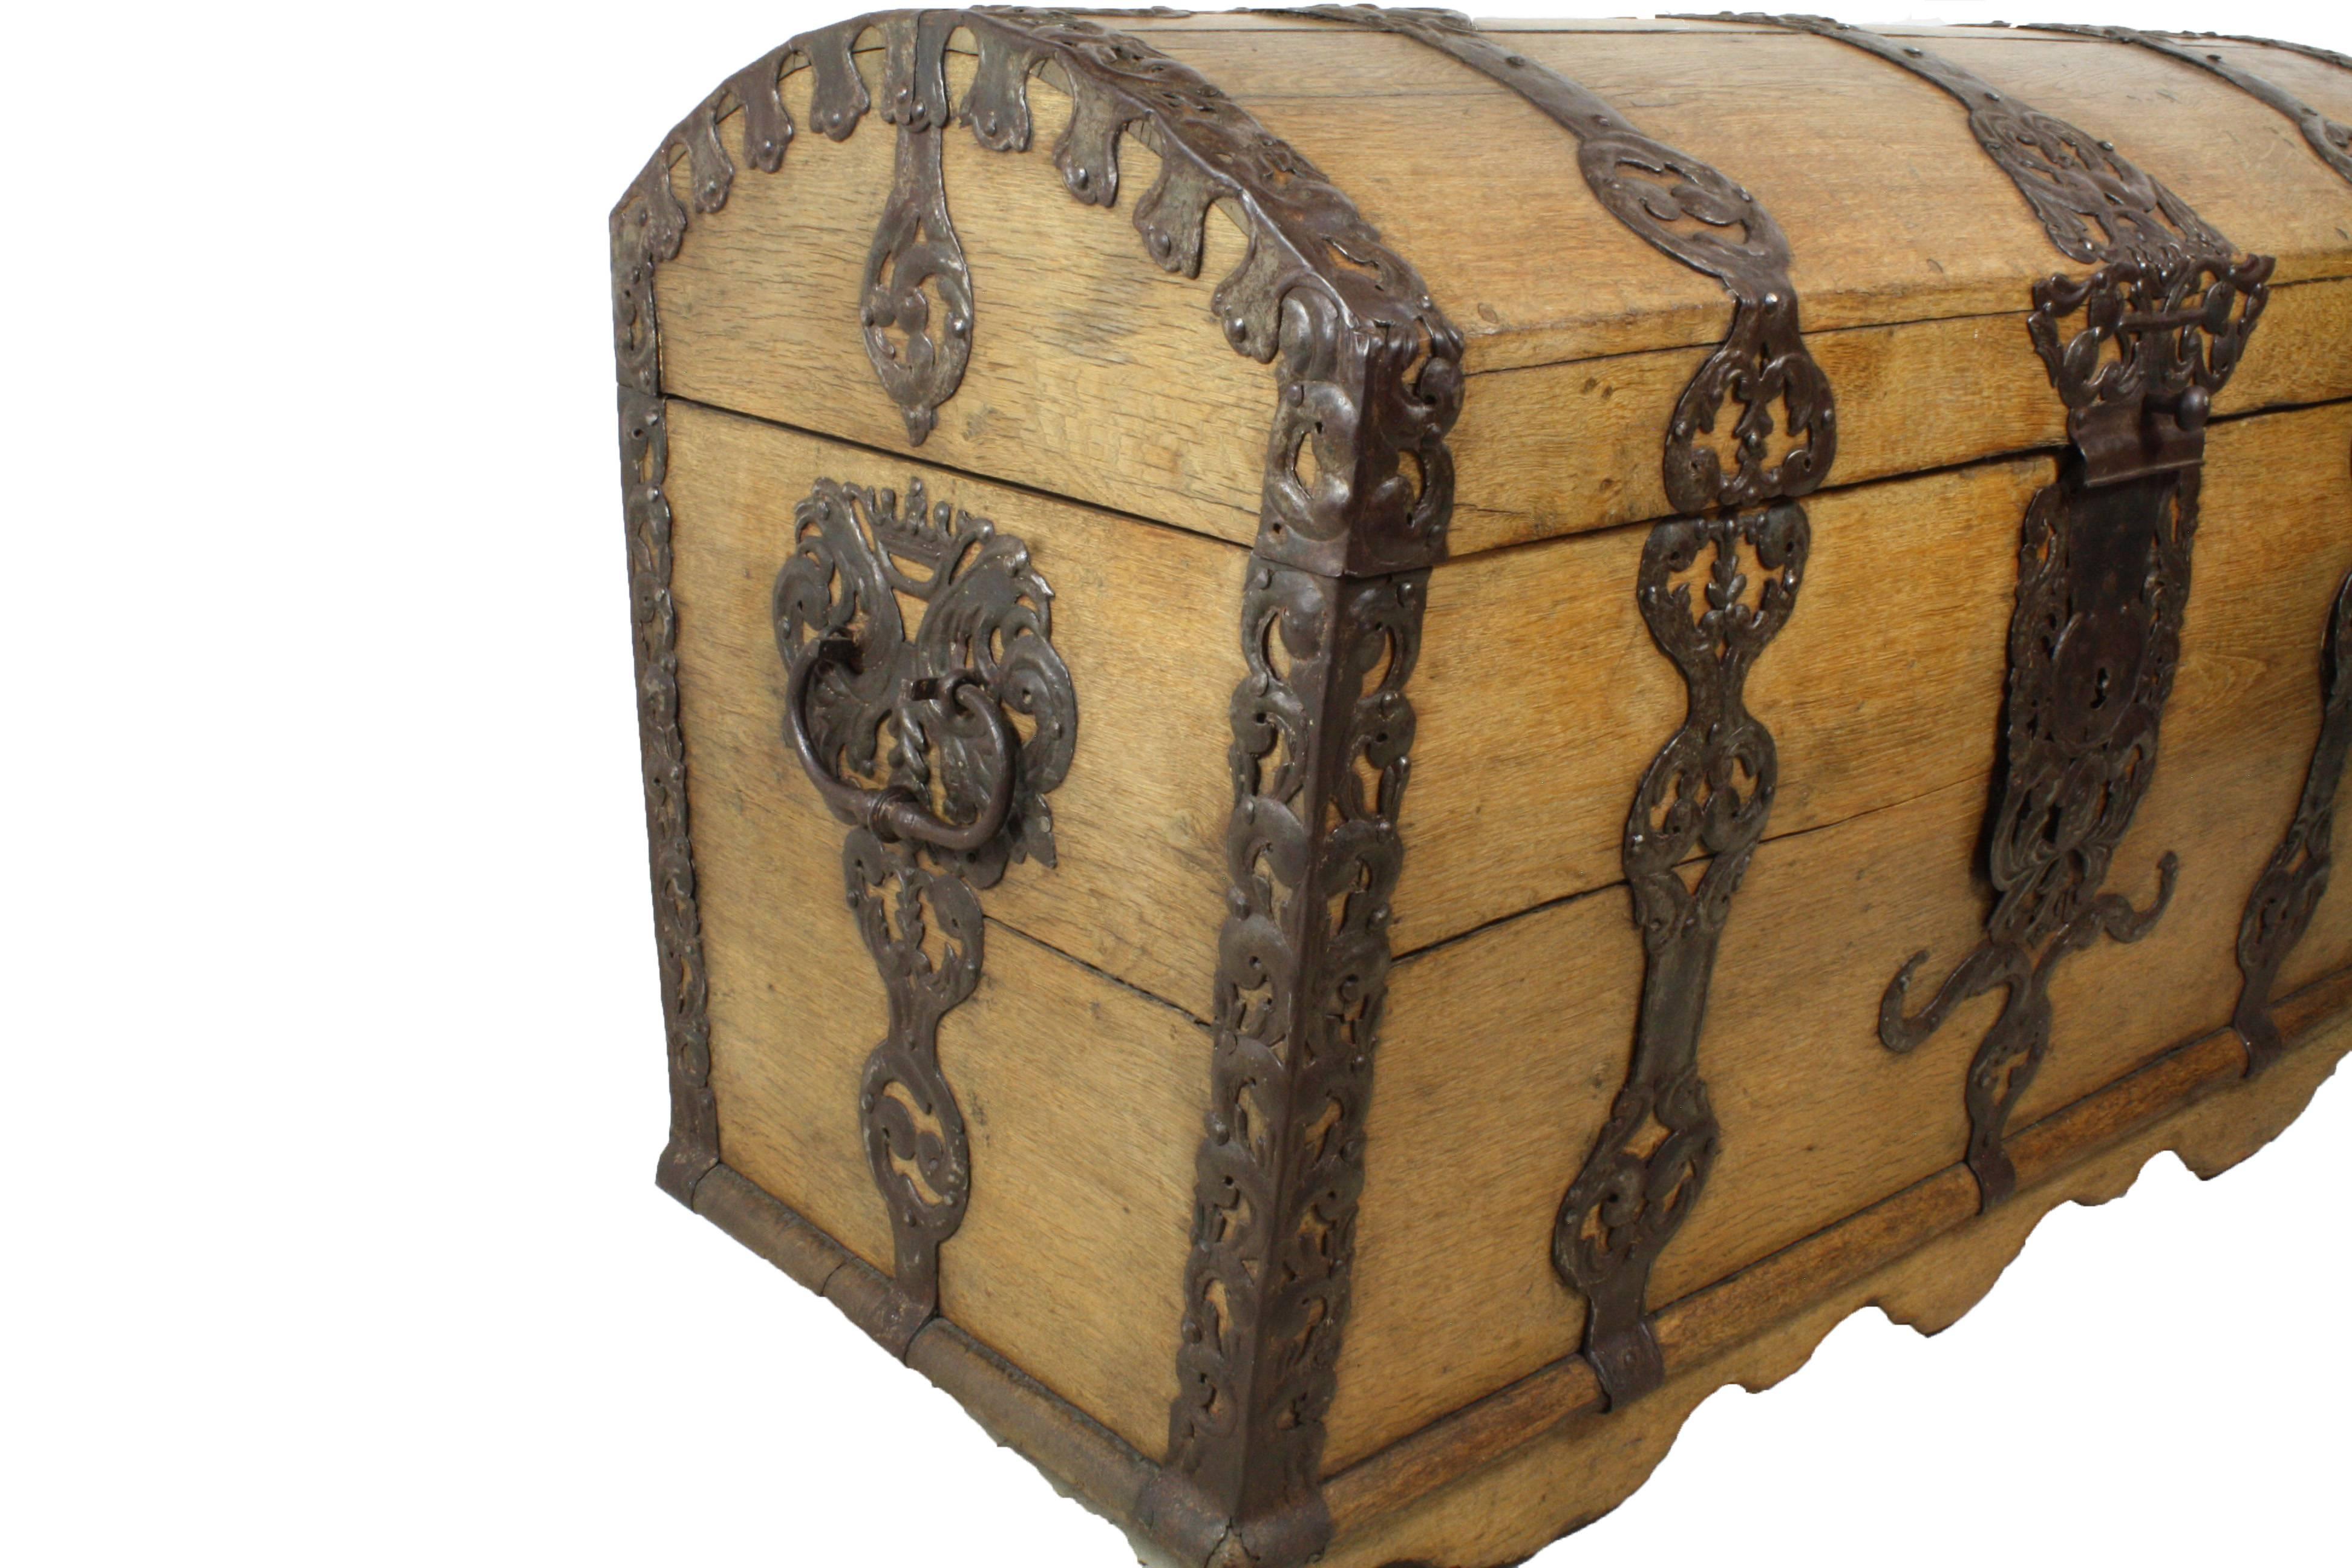 A substantial Dutch oak sea chest with beautifully detailed hand-forged and cut iron embellishments, from the Dutch golden ages. Full logs where drilled and used as rollers for transport and the lovely natural wax finish, which would protect the